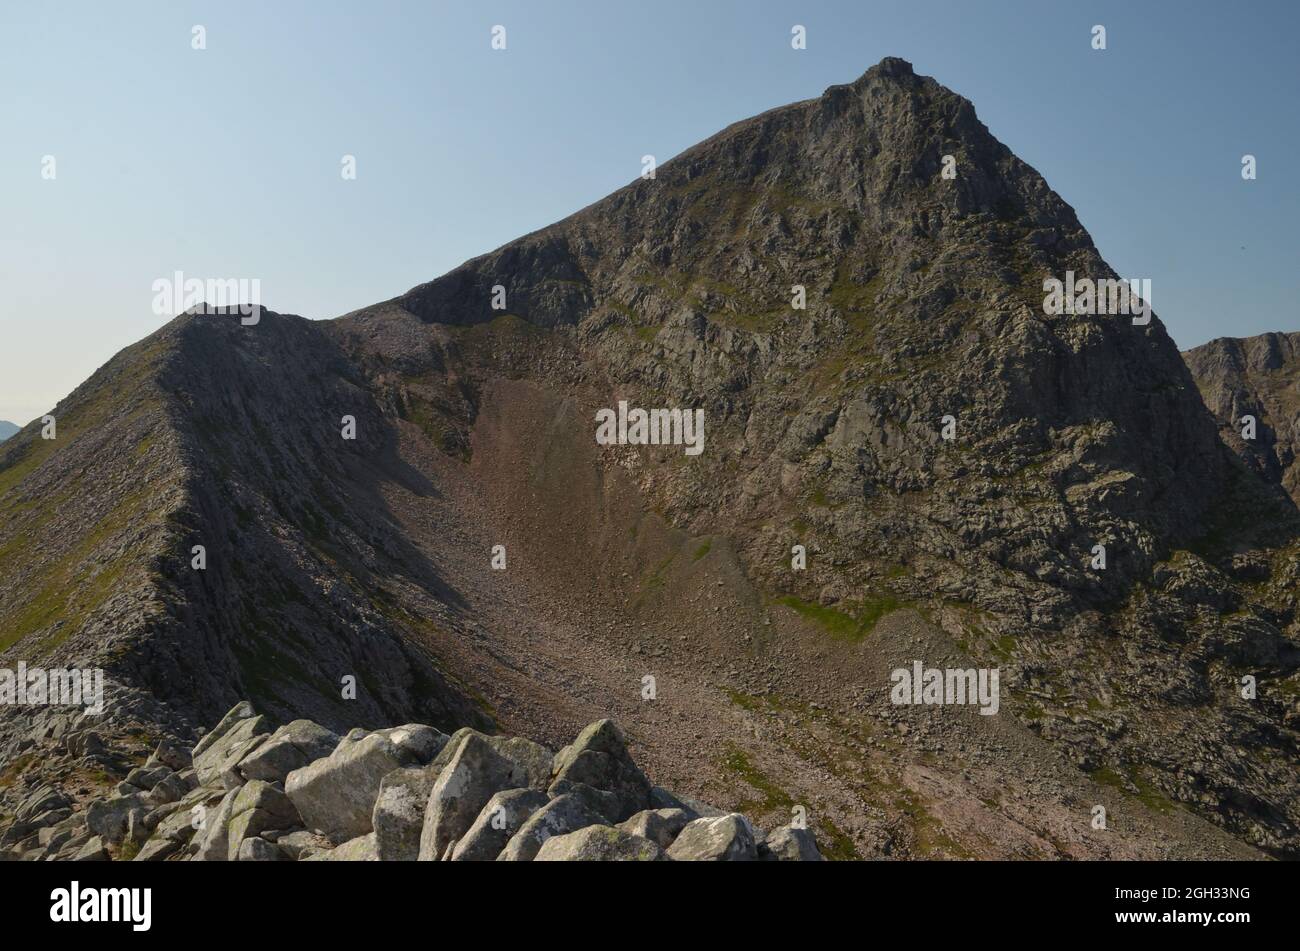 Ben Nevis, Britain's highest mountain, viewed from the Càrn Mòr Dearg Arête, Scottish Highlands, UK.  This is the east face of Ben Nevis. Stock Photo